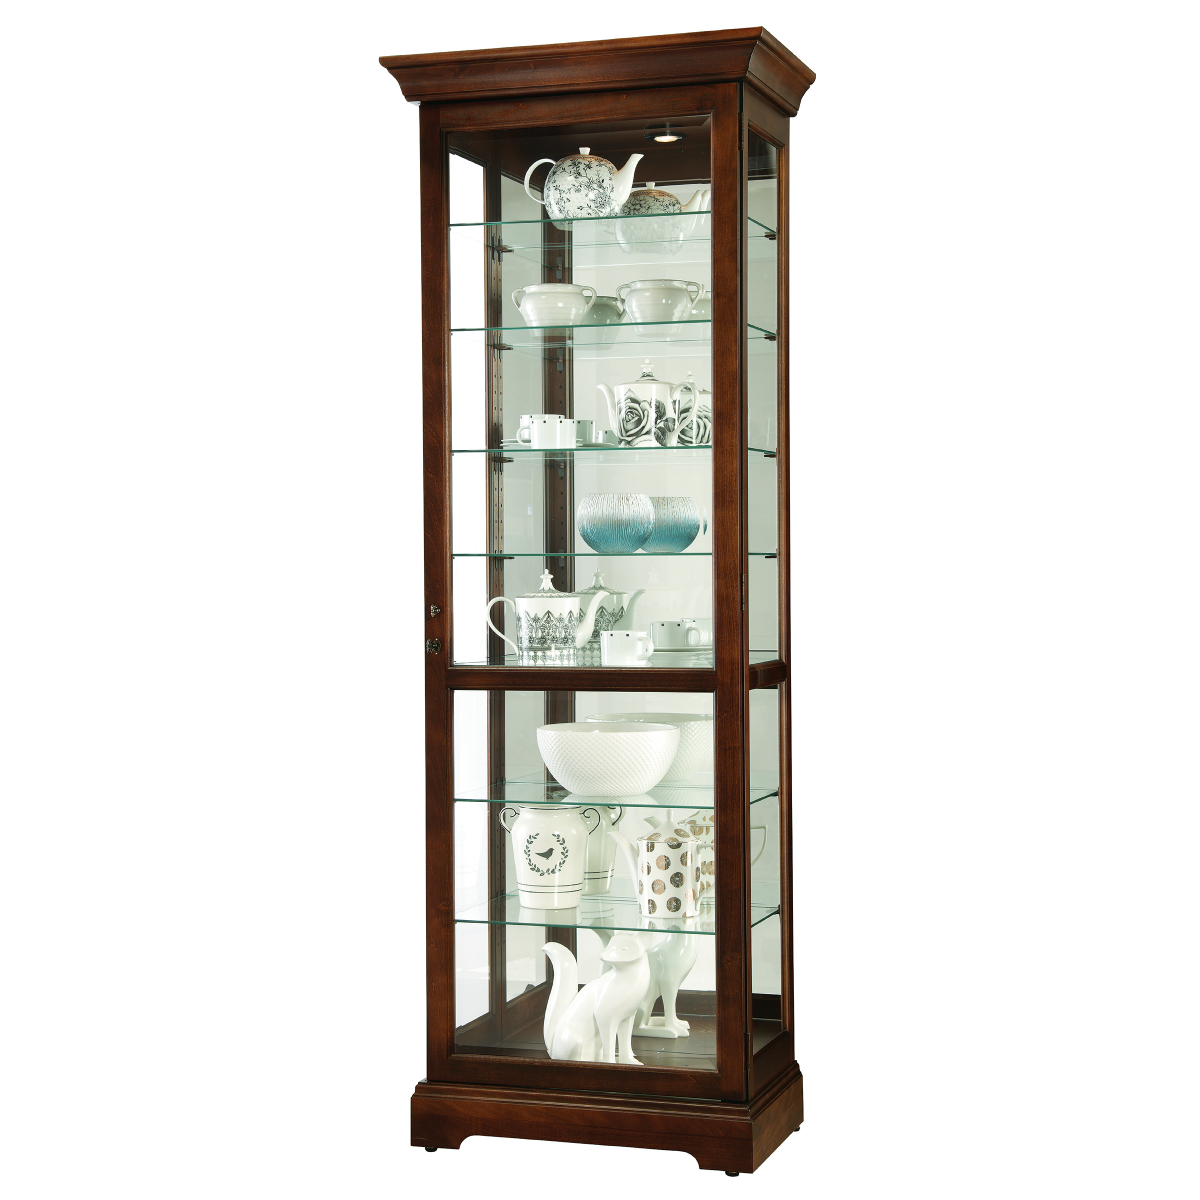 Howard Miller Chesterbrook Curio Cabinet 680658 - Home Bars USA